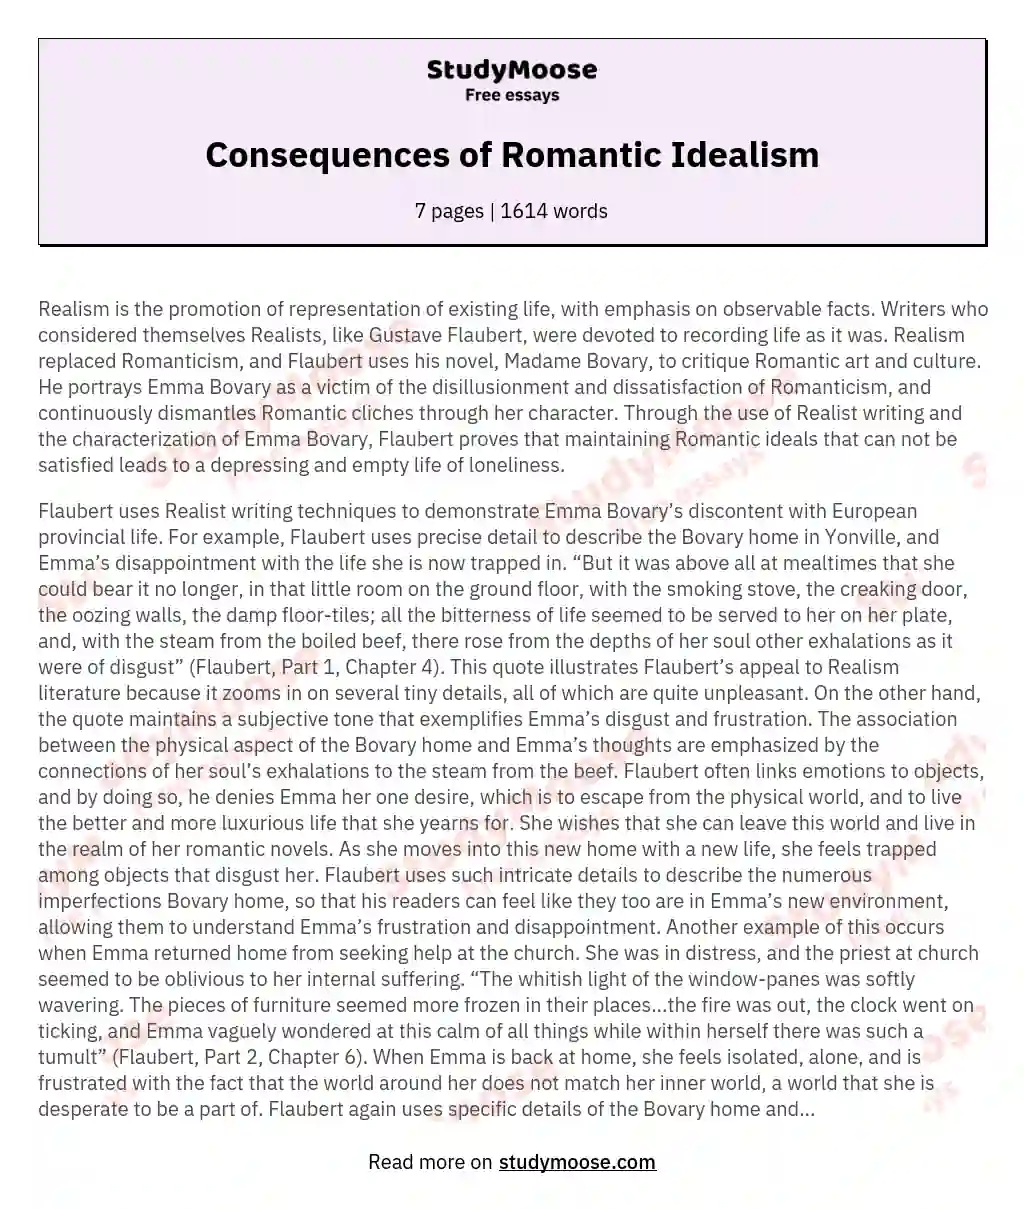 Consequences of Romantic Idealism